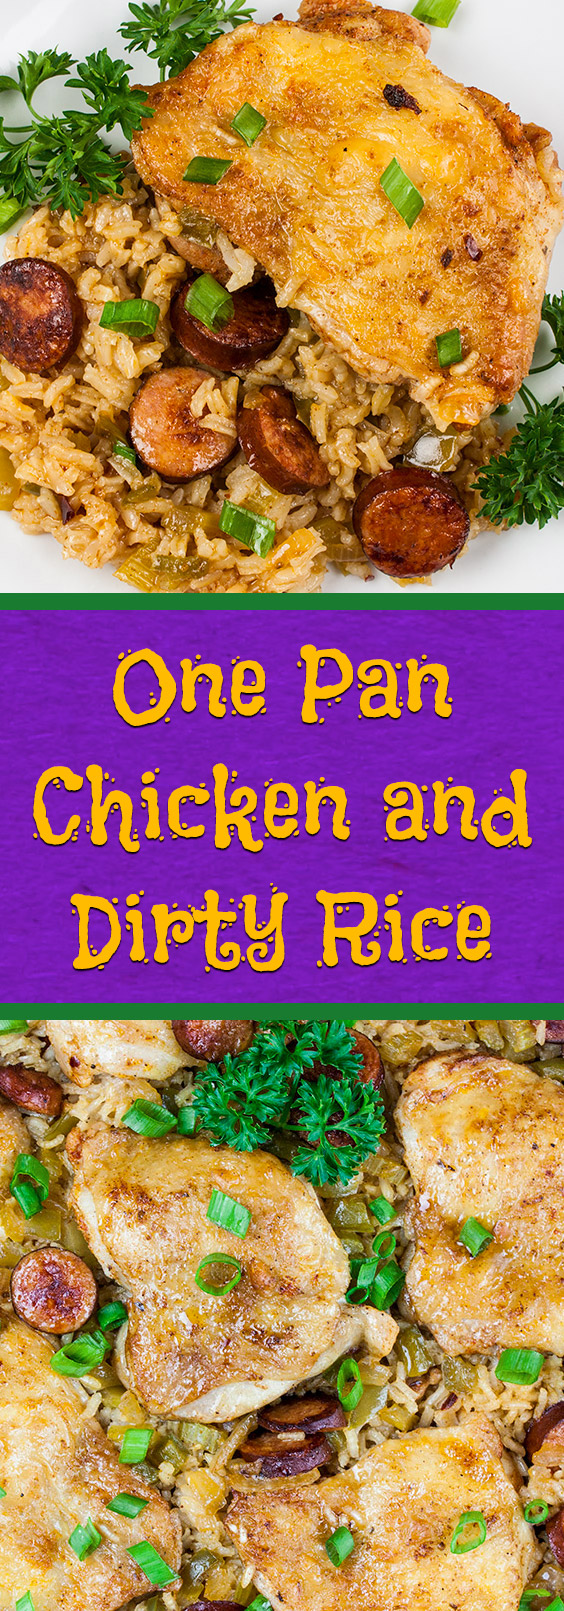 One Pan Chicken and Dirty Rice - Don't Sweat The Recipe